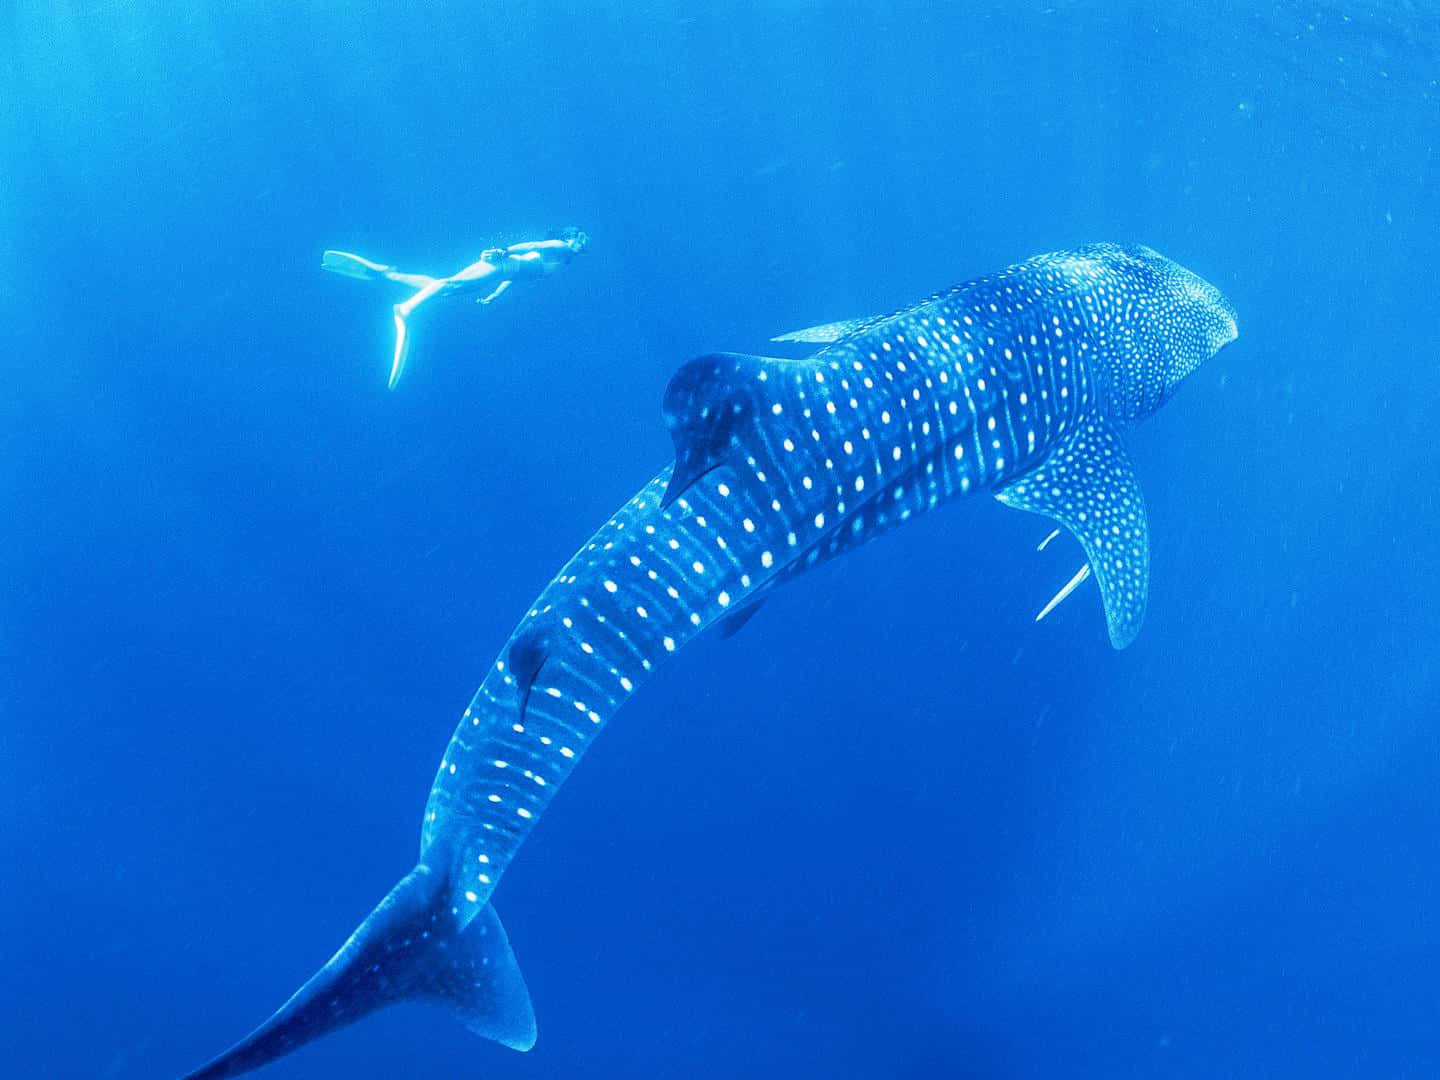 "Swimming with the Whale Shark, the Largest Fish in the Sea"